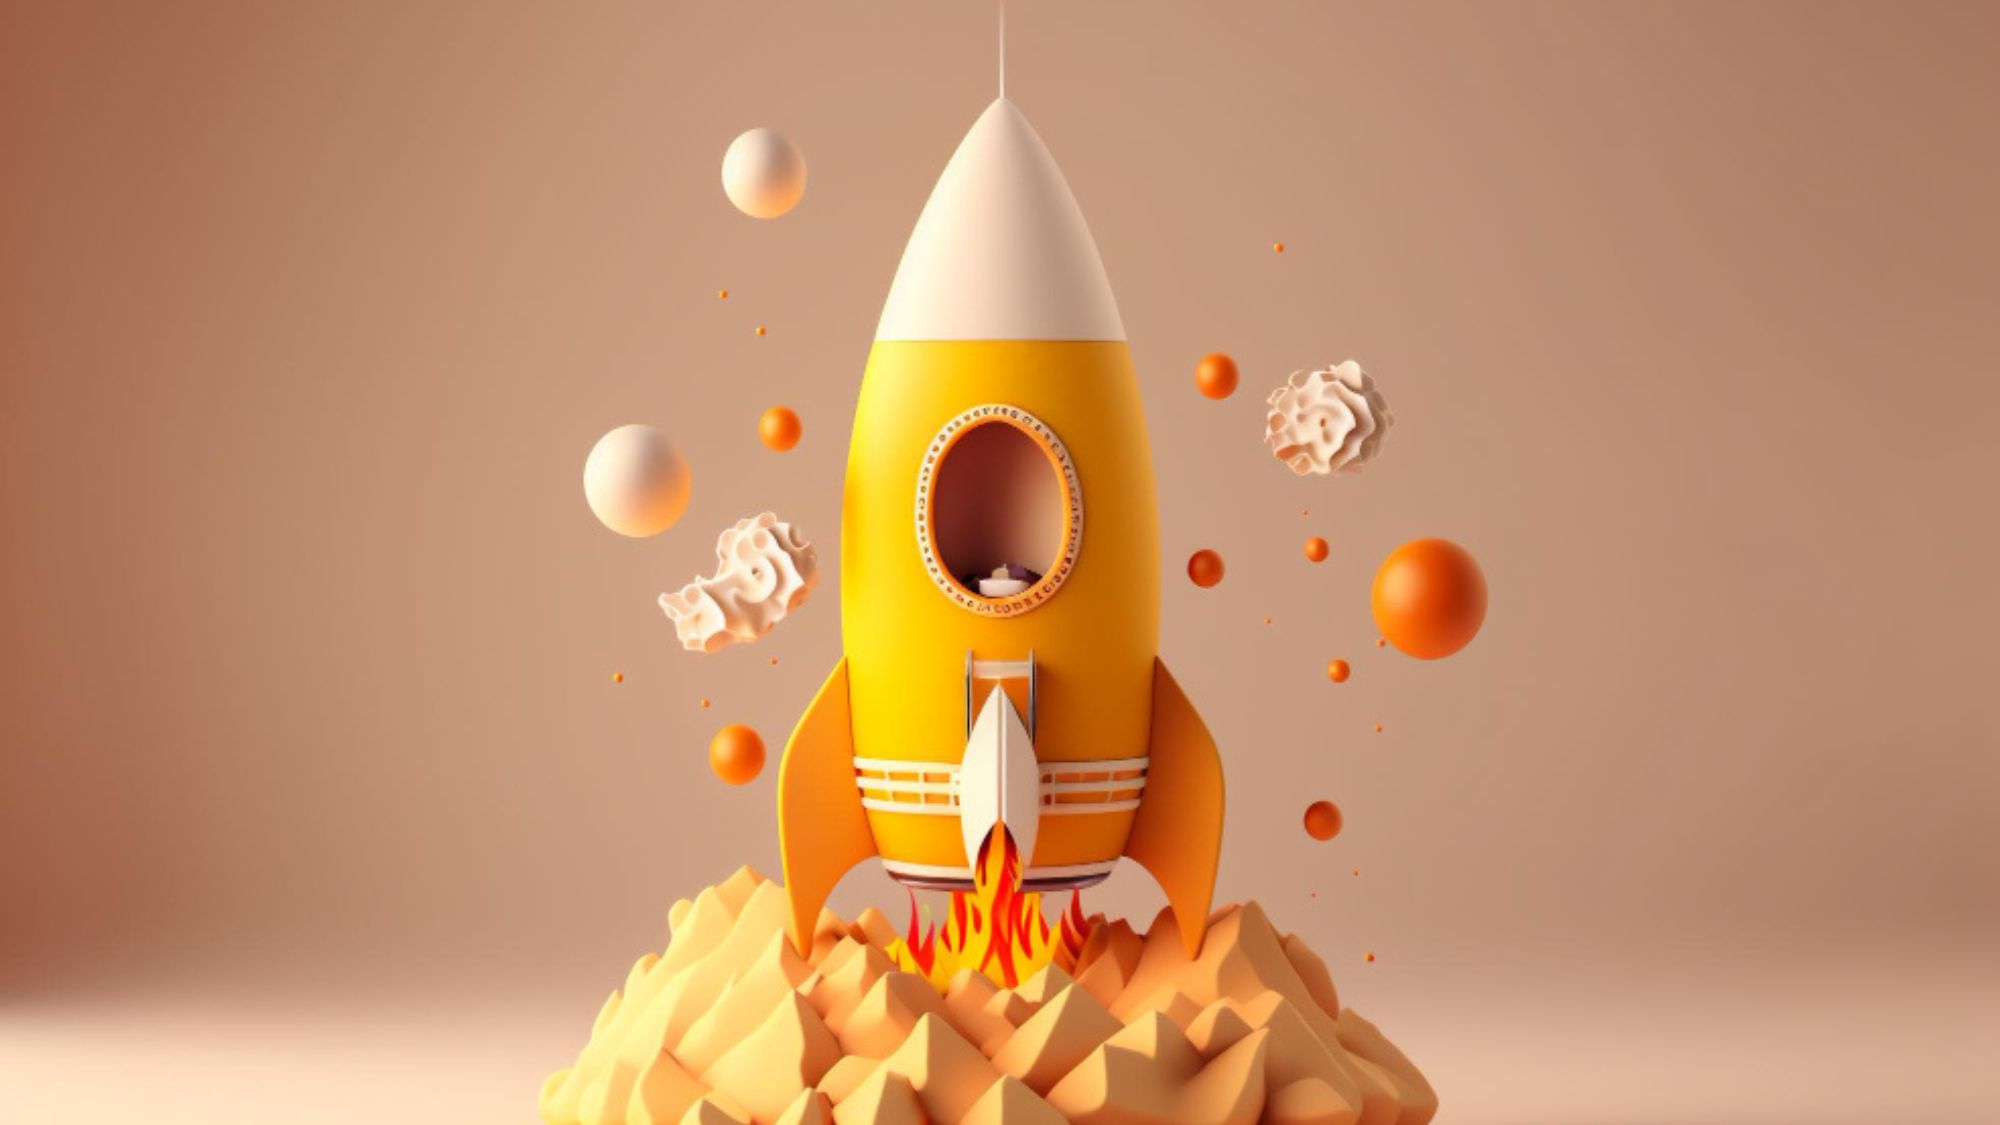 A yellow rocket taking off symbolizing dos and don'ts of website design